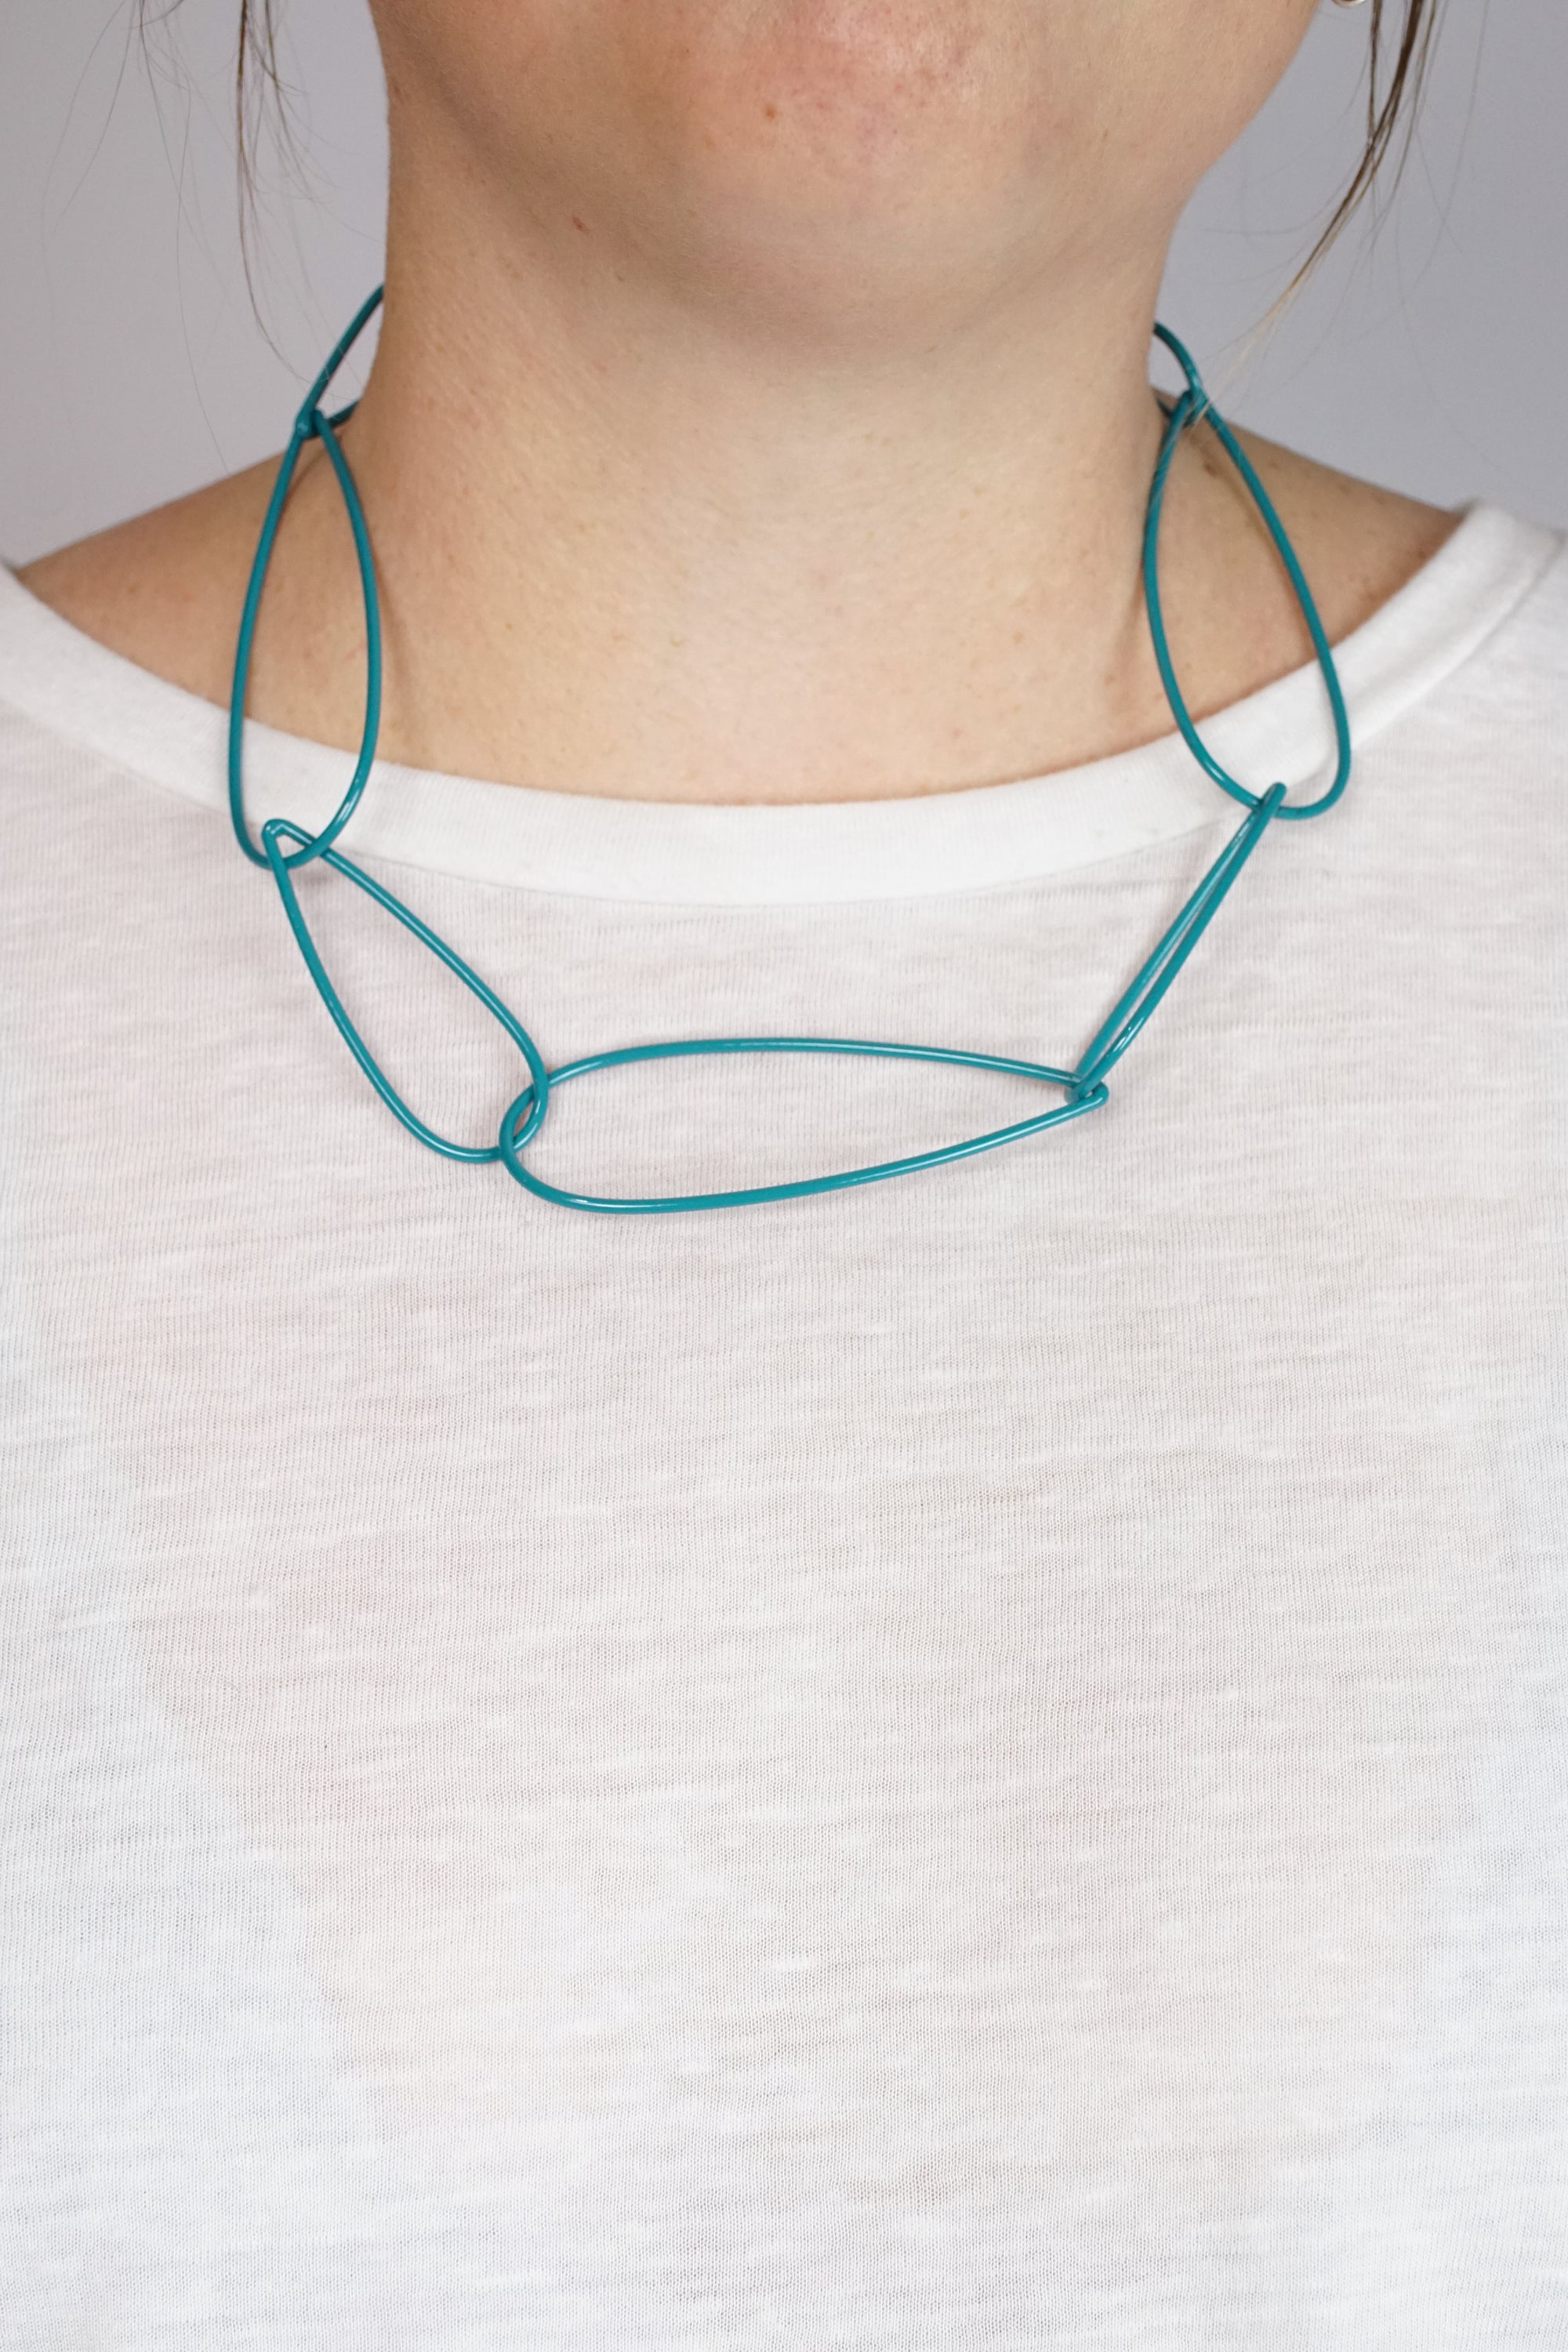 Modular Necklace No. 6 in Bold Teal